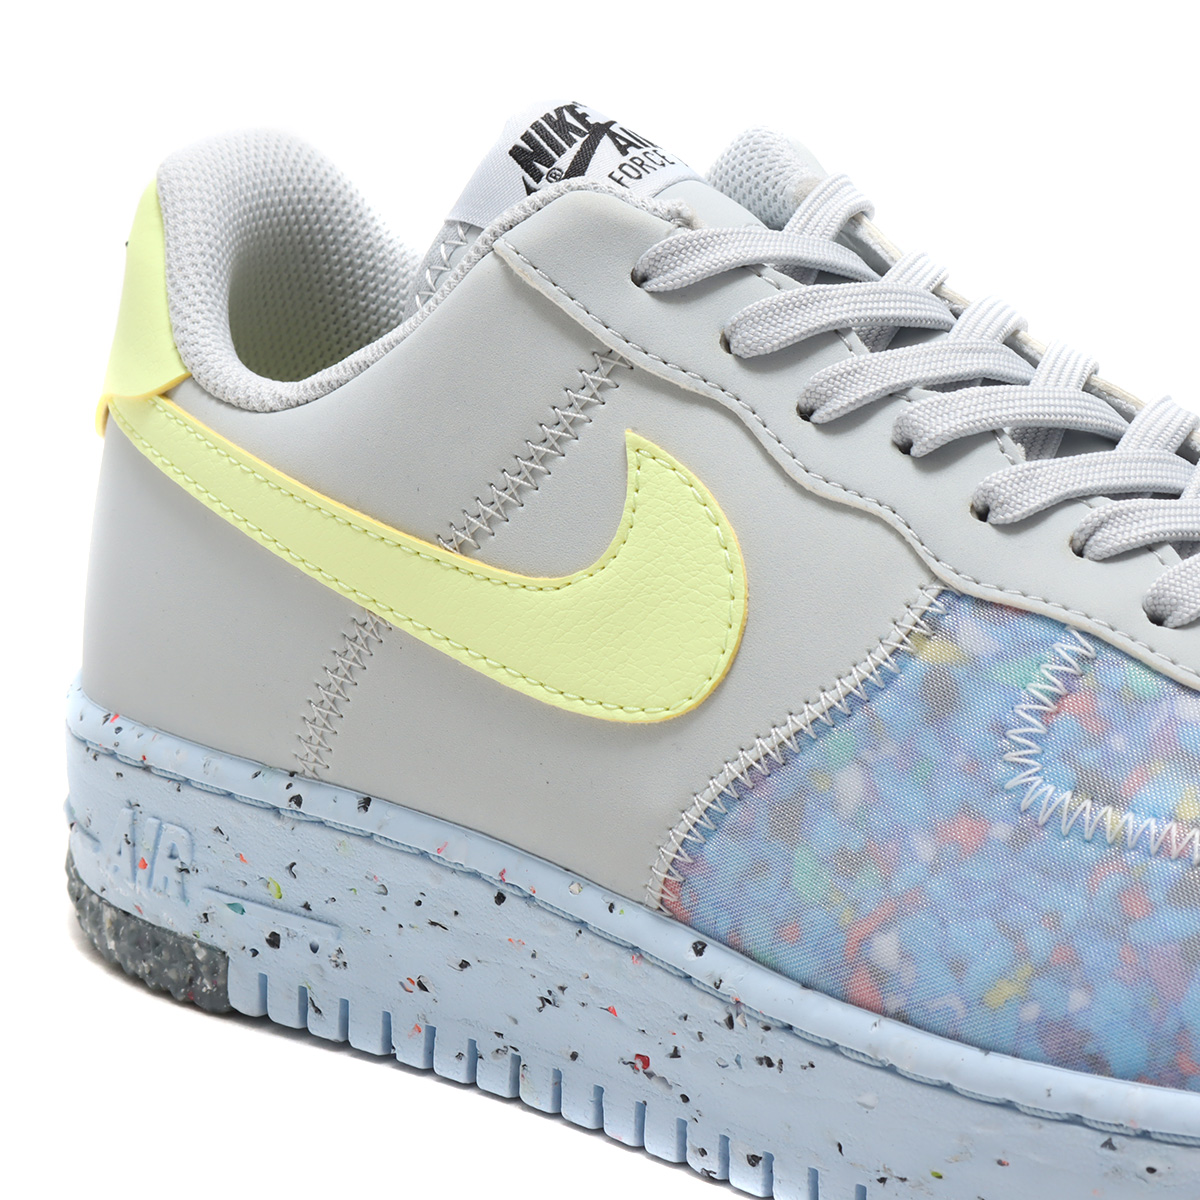 NIKE AIR FORCE 1 CRATER(ナイキ エア フォース 1 クレーター)PURE PLATINUM/BARELY  VOLT-SUMMIT WHITE【メンズ スニーカー】20HO-I | atmos-tokyo